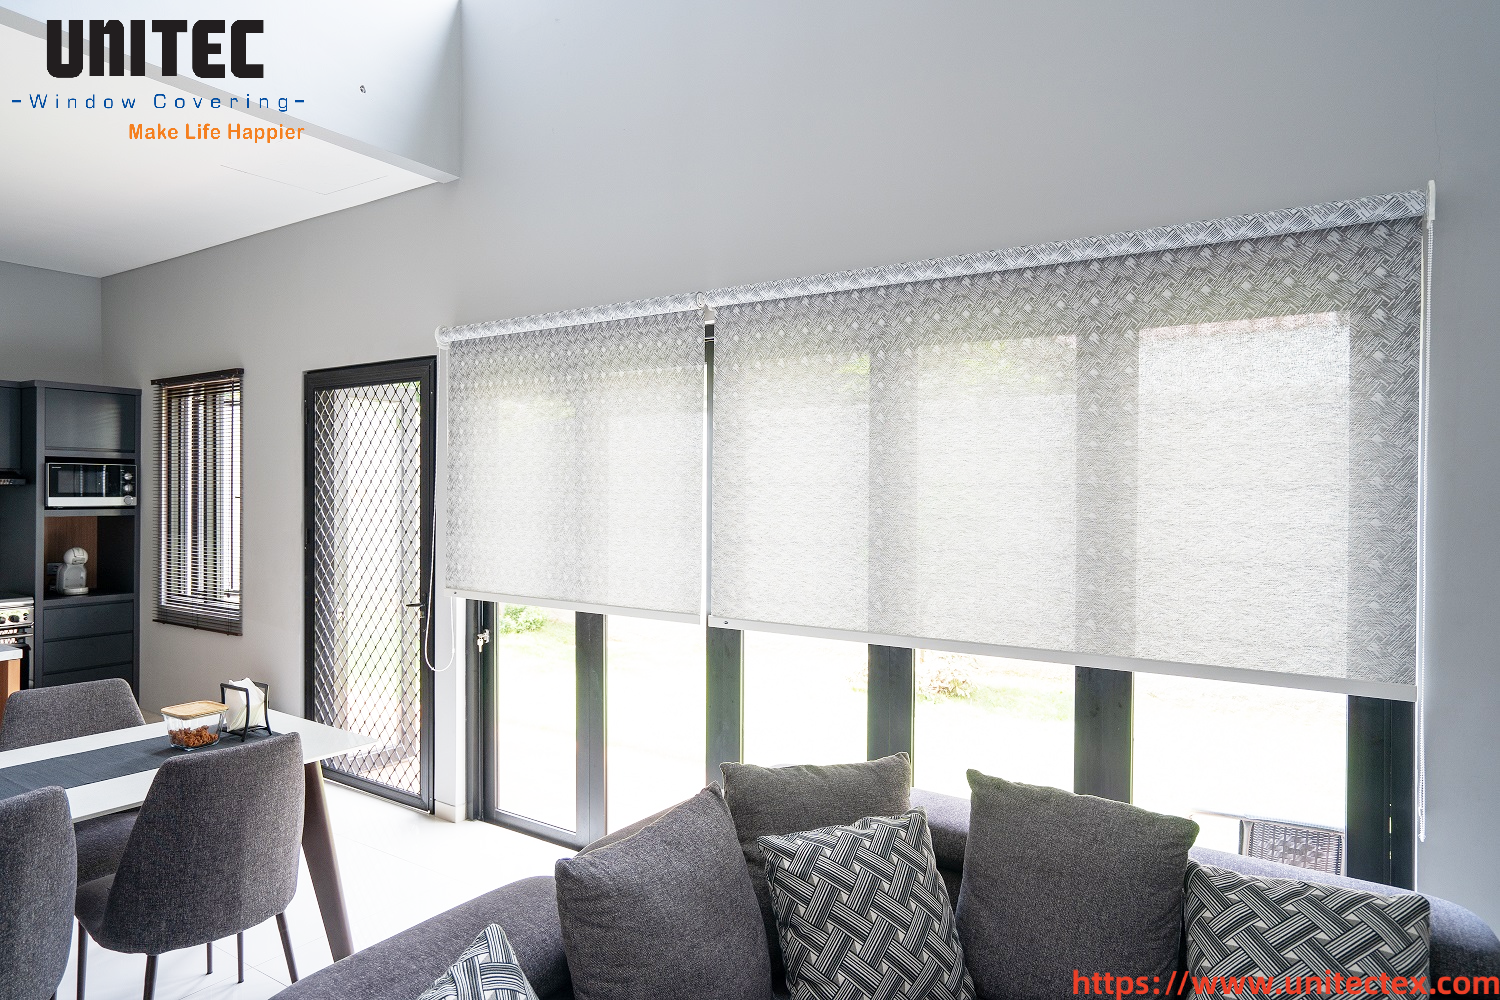 Would you roll up the blinds with blackout shades? Analyze the advantages and disadvantages